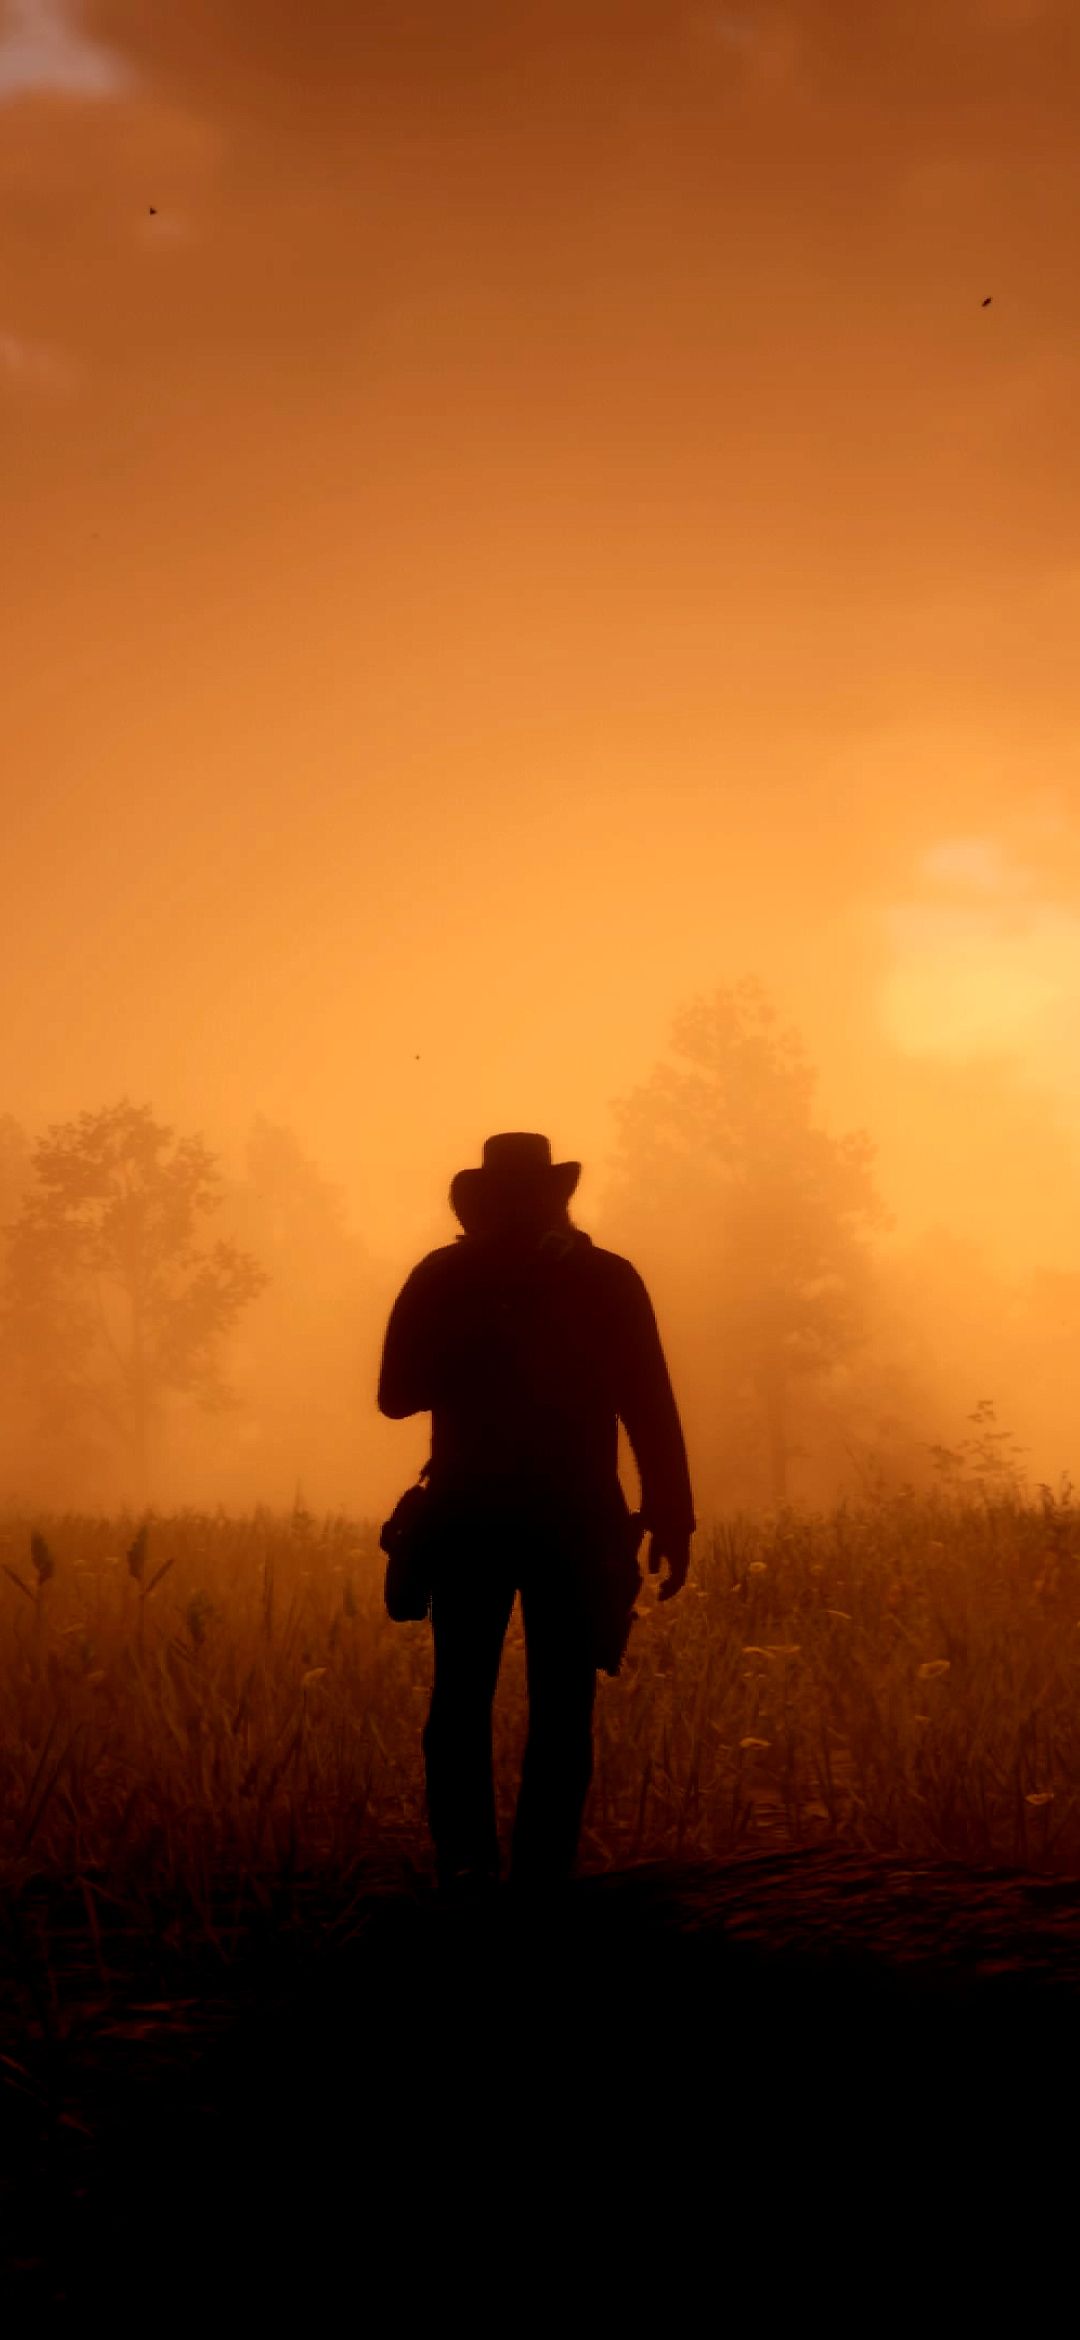 Game Red Dead Redemption 2 1080x2340 Resolution Wallpaper, HD Games 4K Wallpaper, Image, Photo and Background